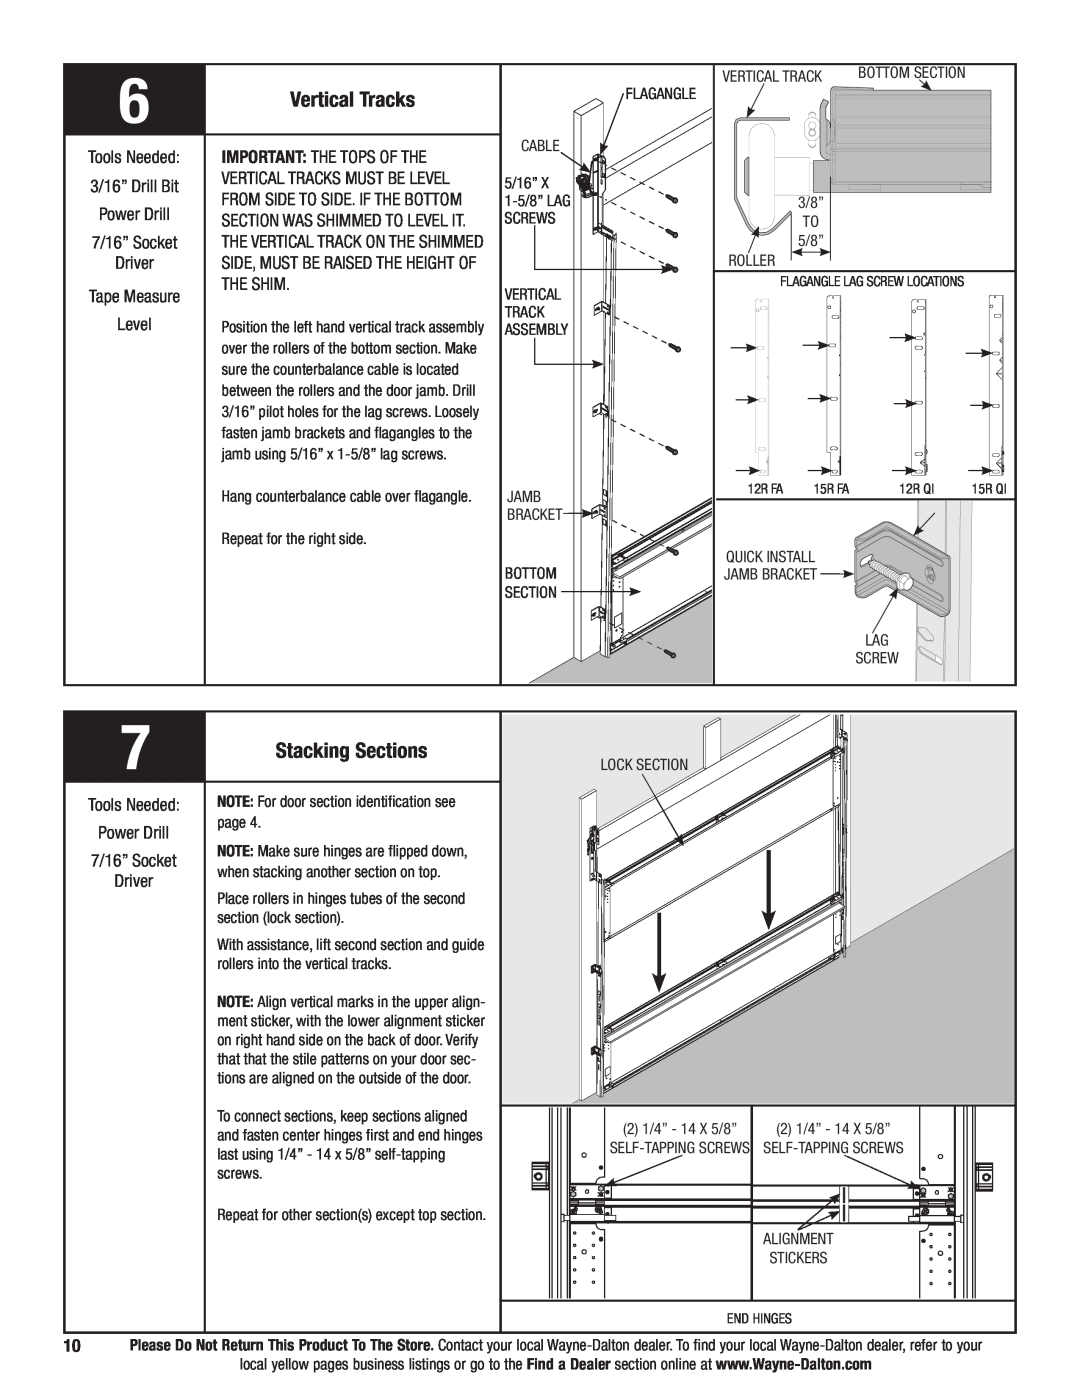 Wayne-Dalton 9700 installation instructions Vertical Tracks, Stacking Sections, Tools Needed 3/16” Drill Bit Power Drill 